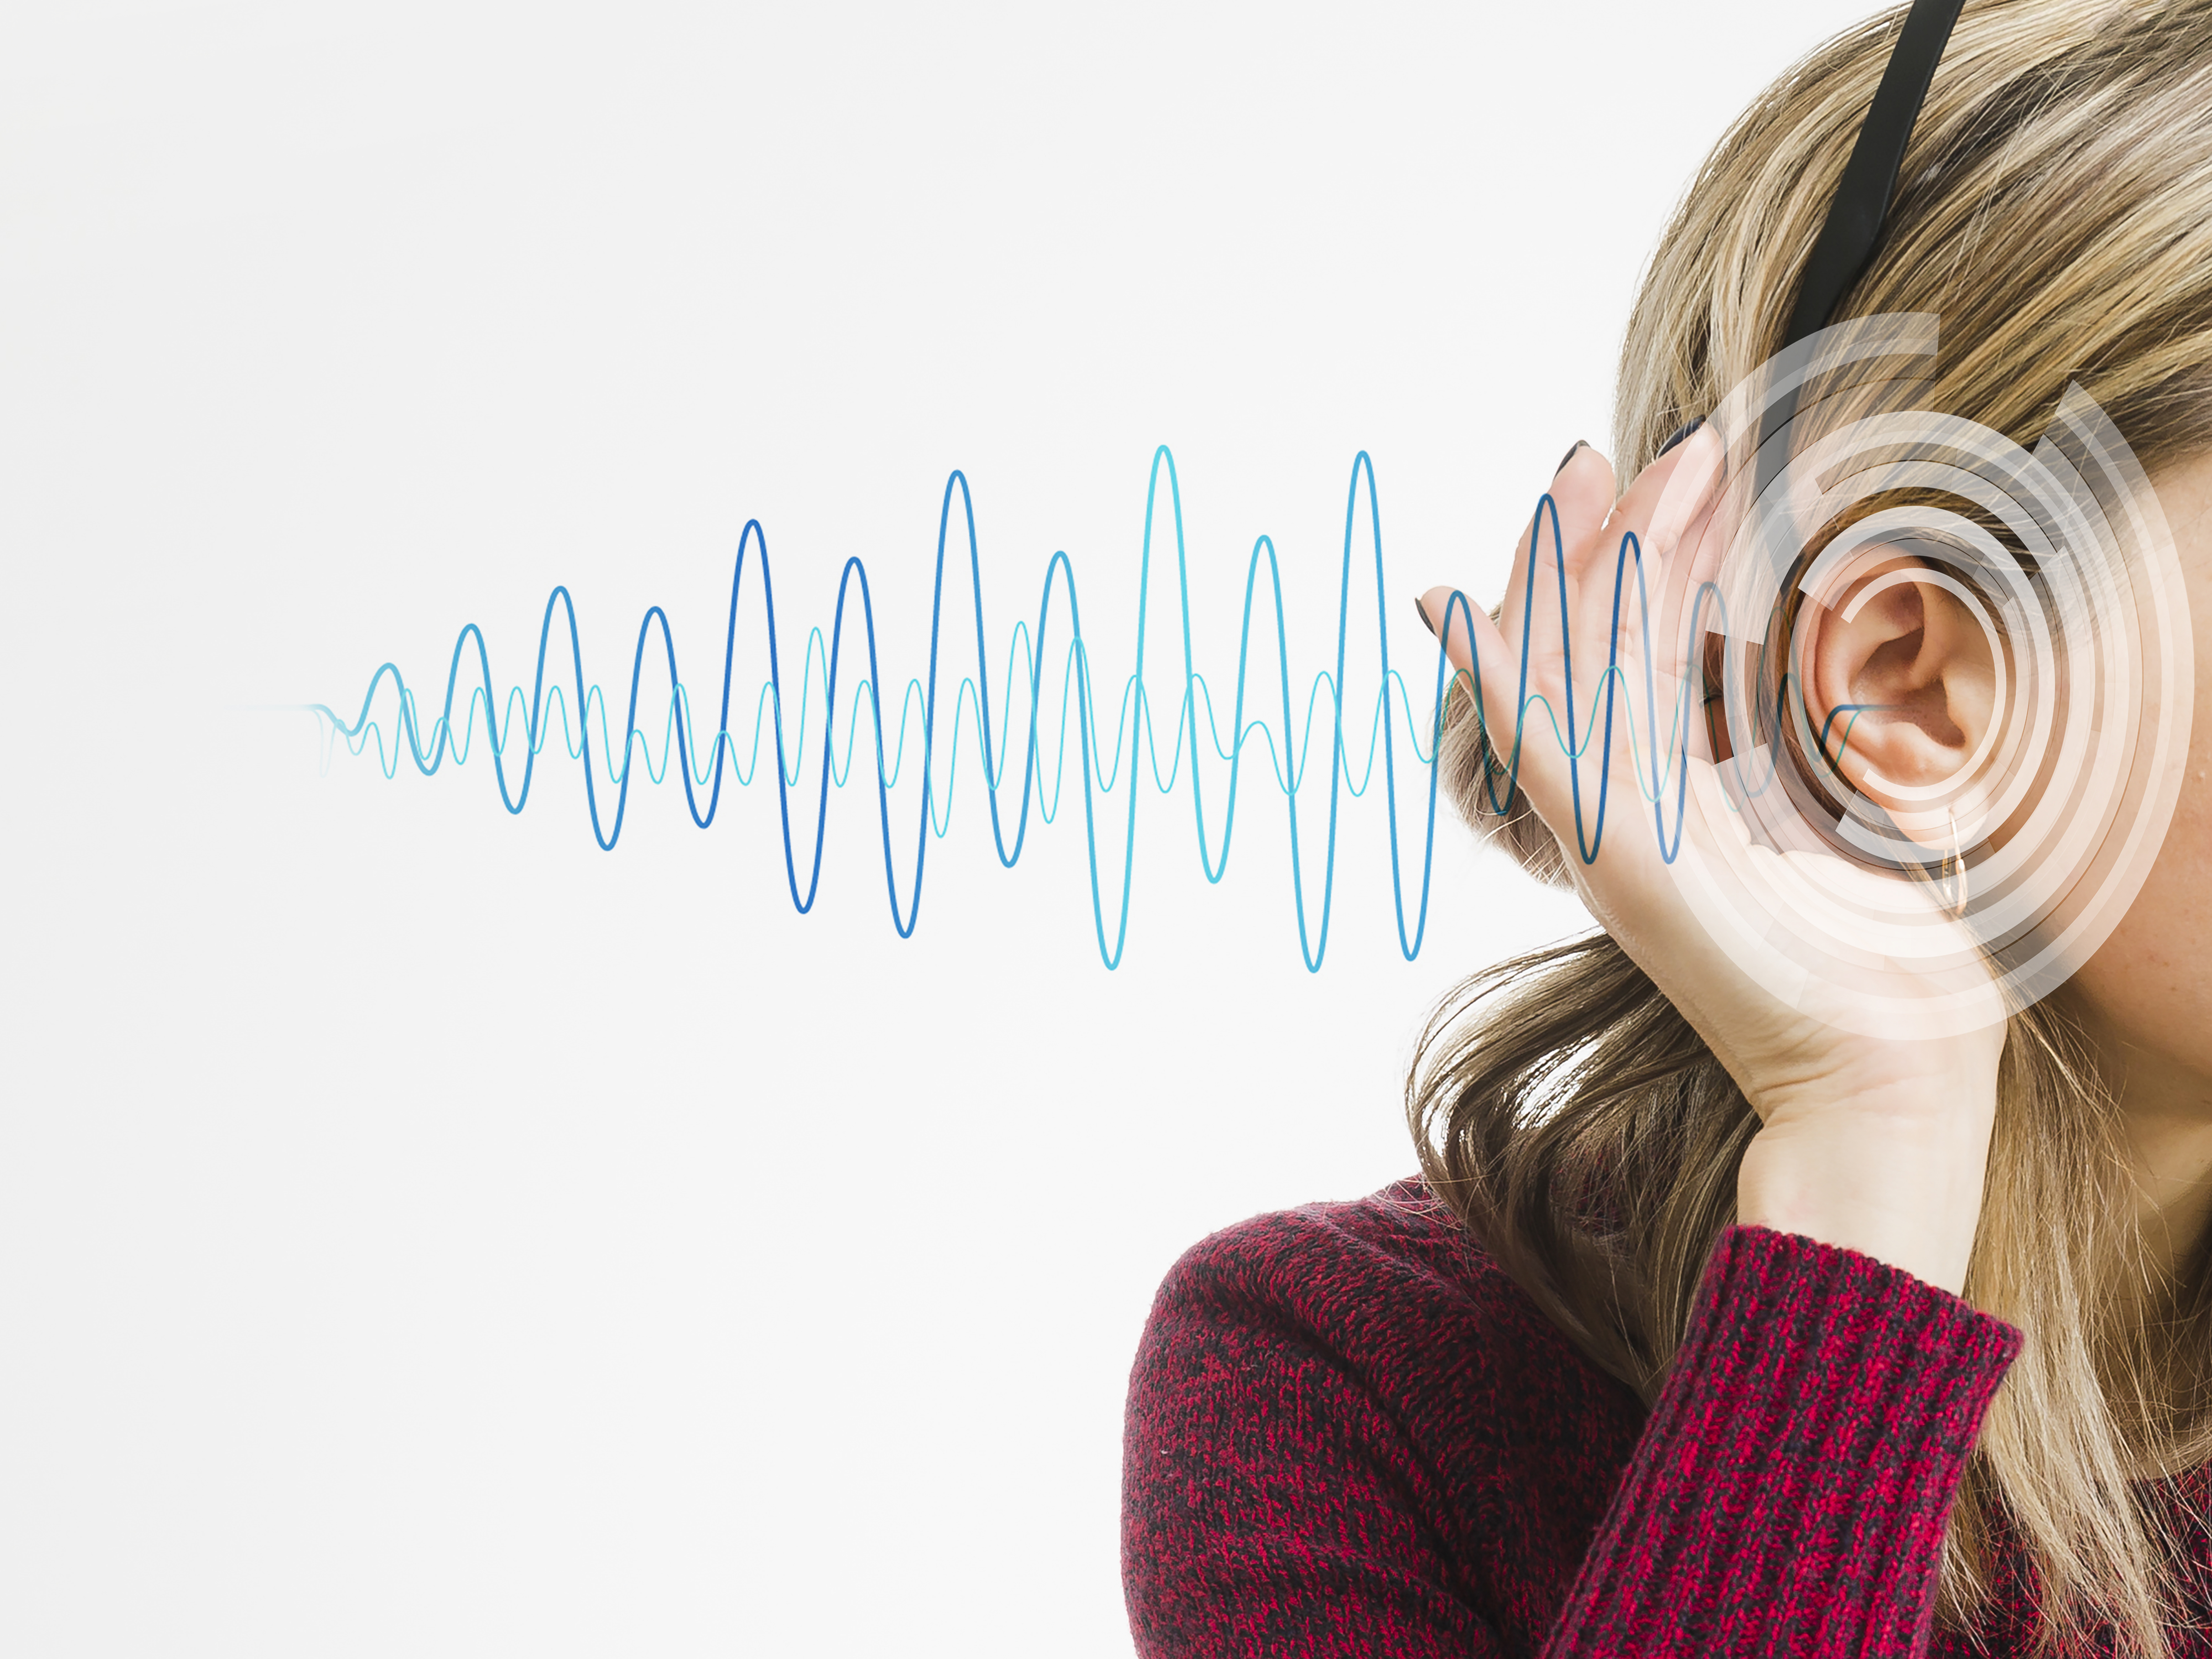 A woman sincerely understanding the audio